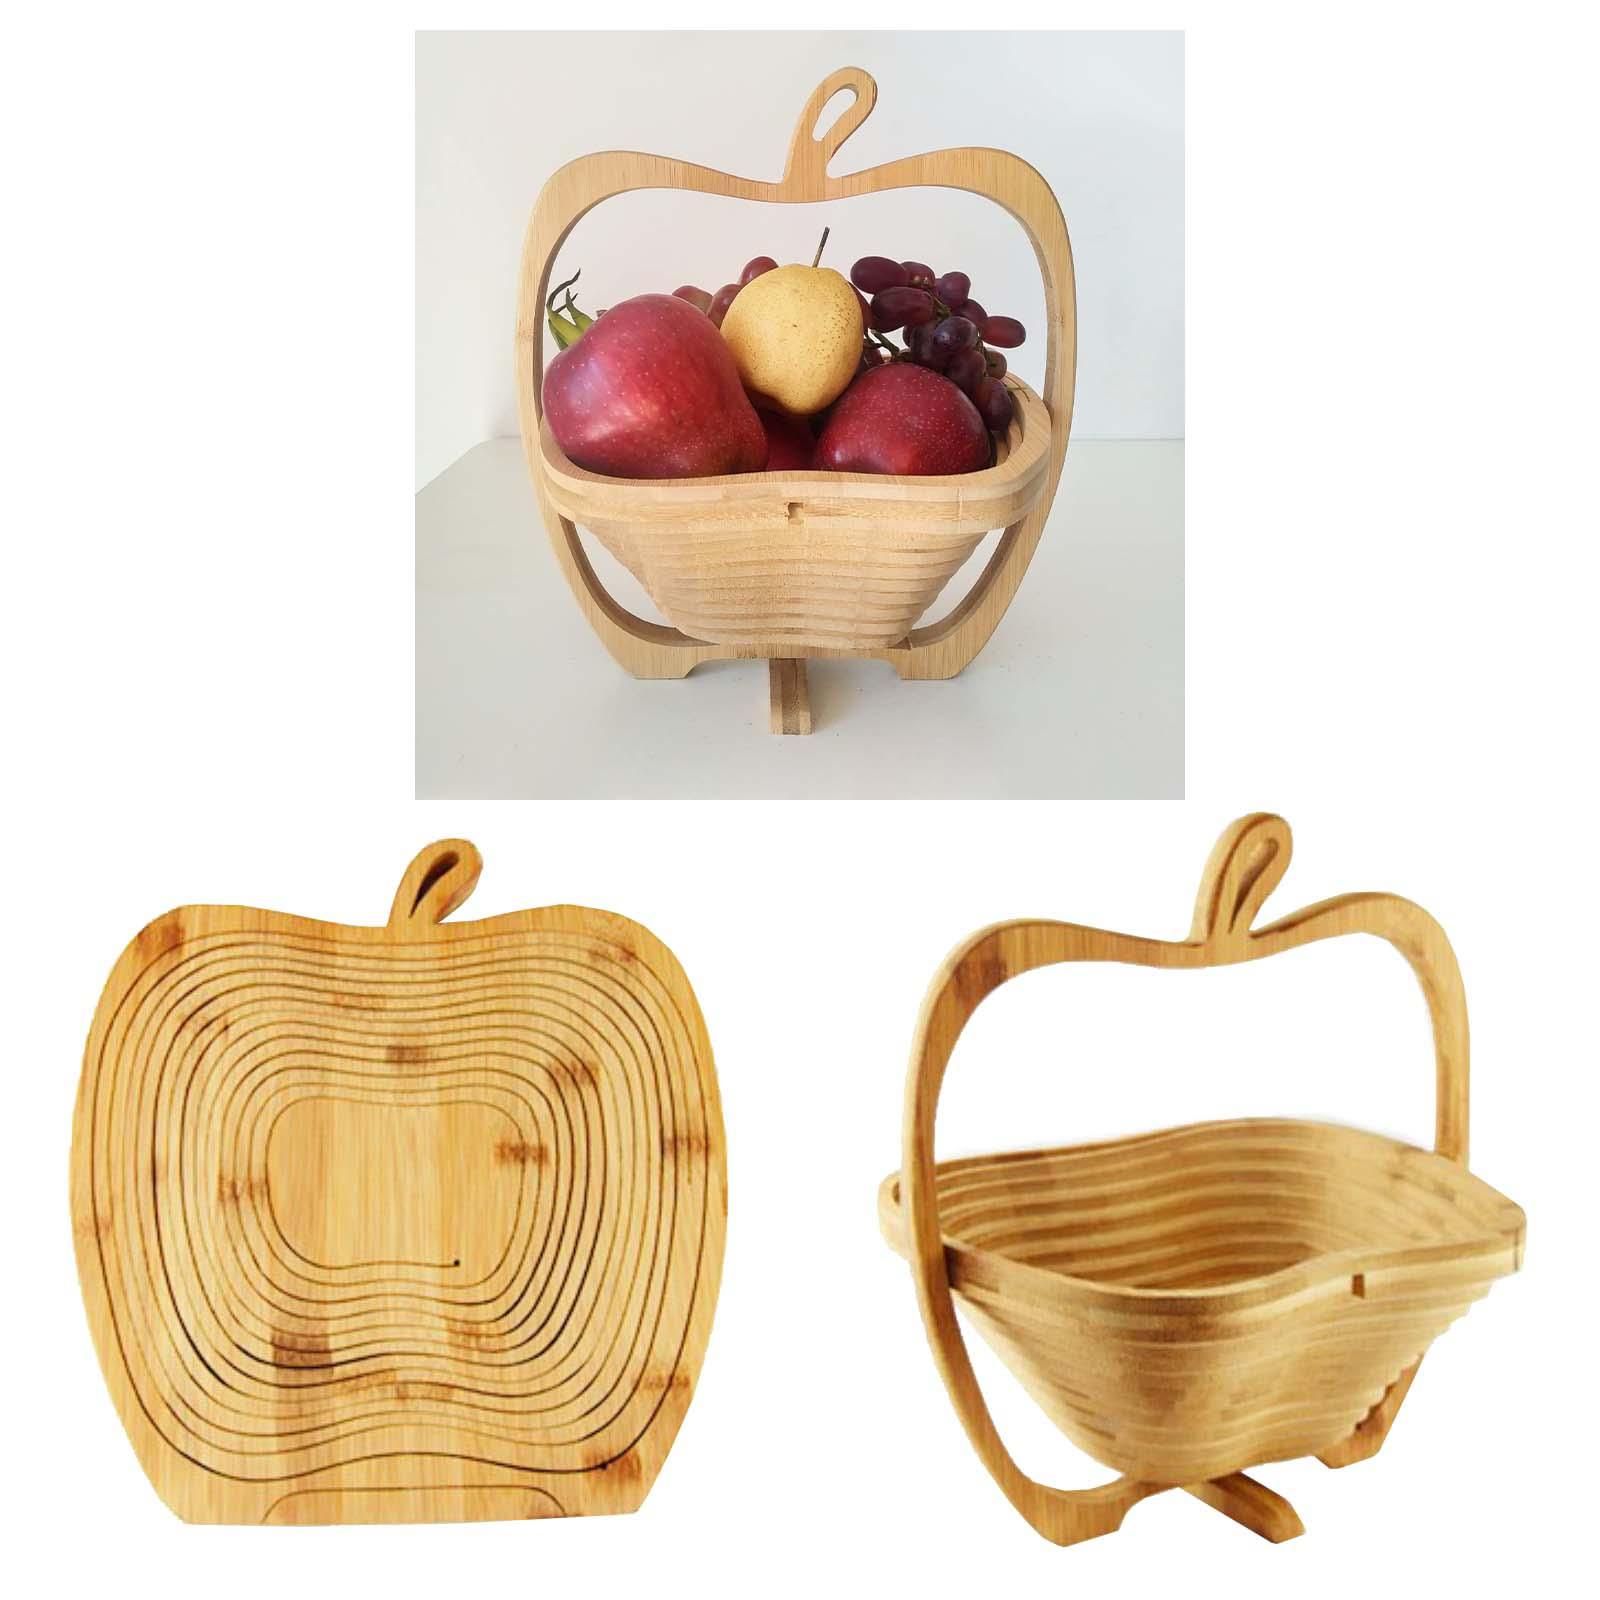 Fruit Basket Collapsible Snack Storage Tray Decorative for Home Kitchen apples